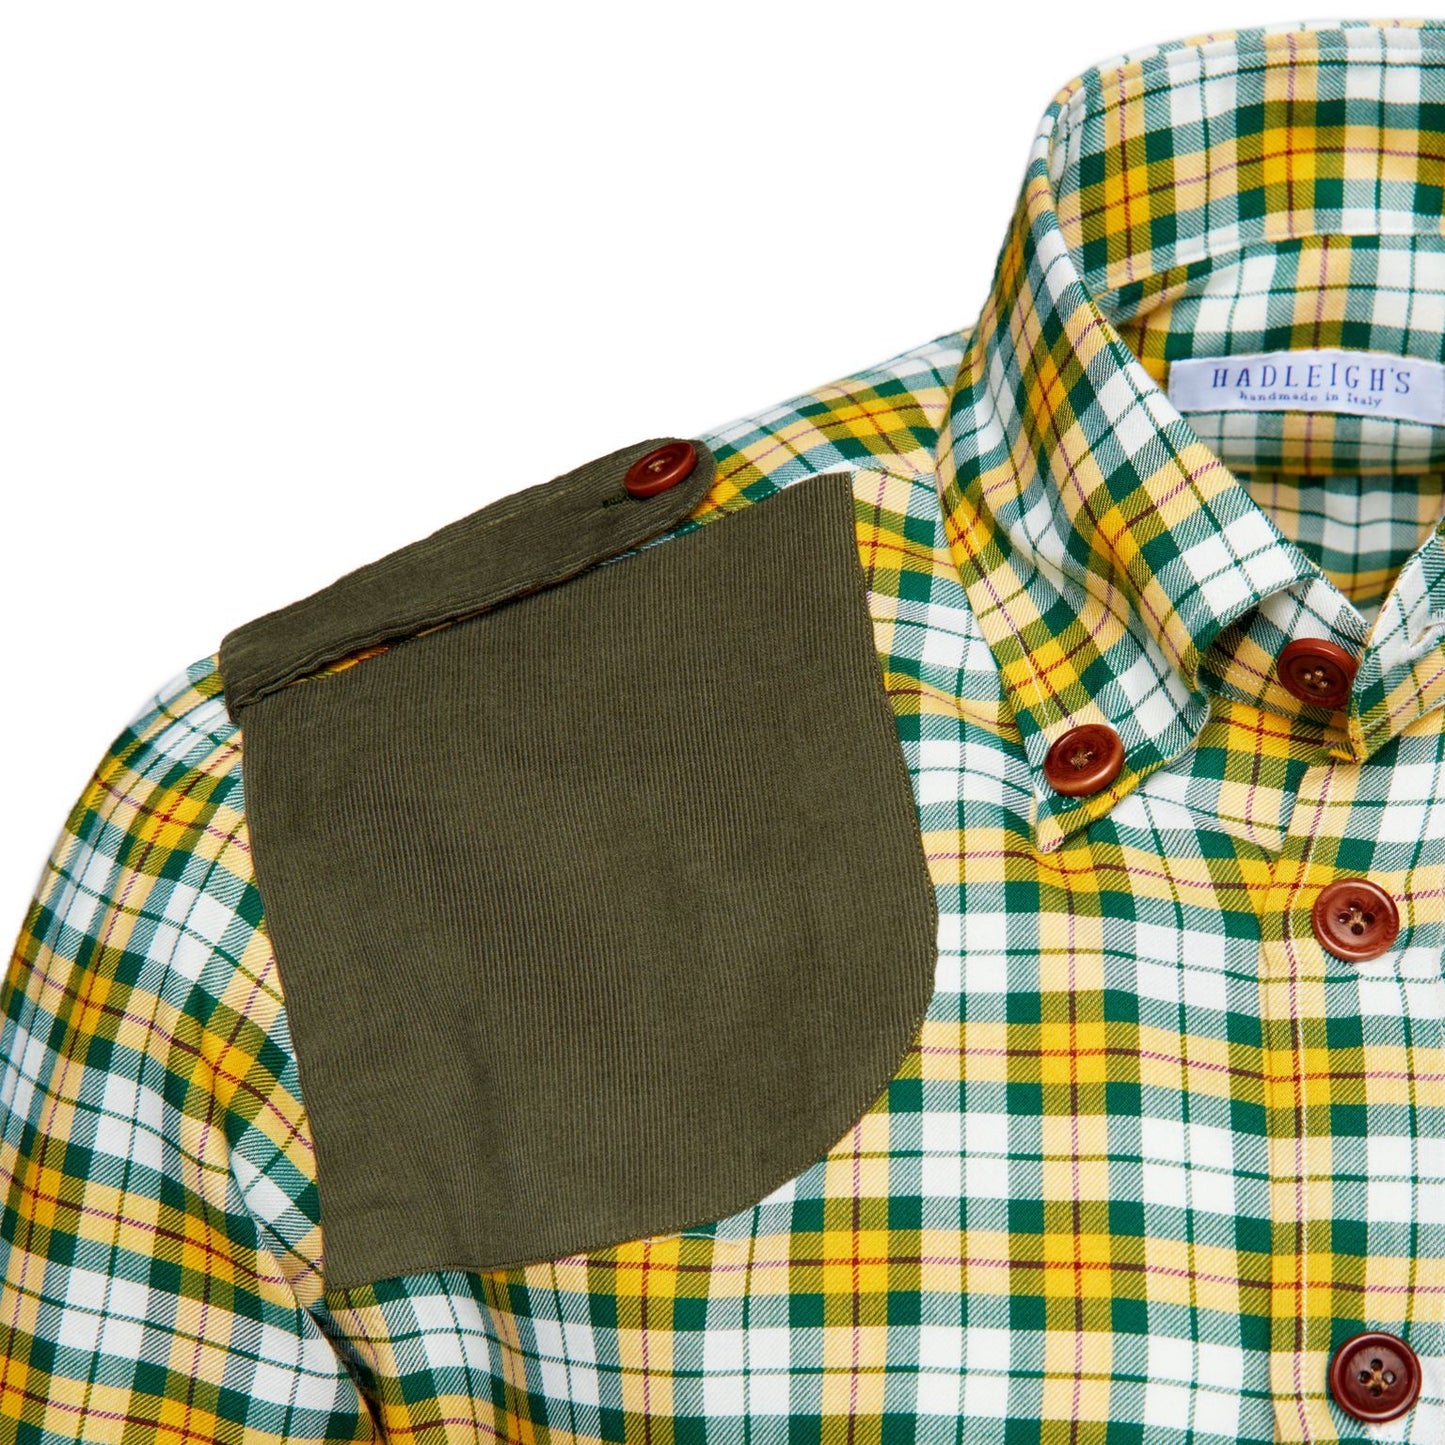 Rip Field Shirt in Yellow/Green Over Check